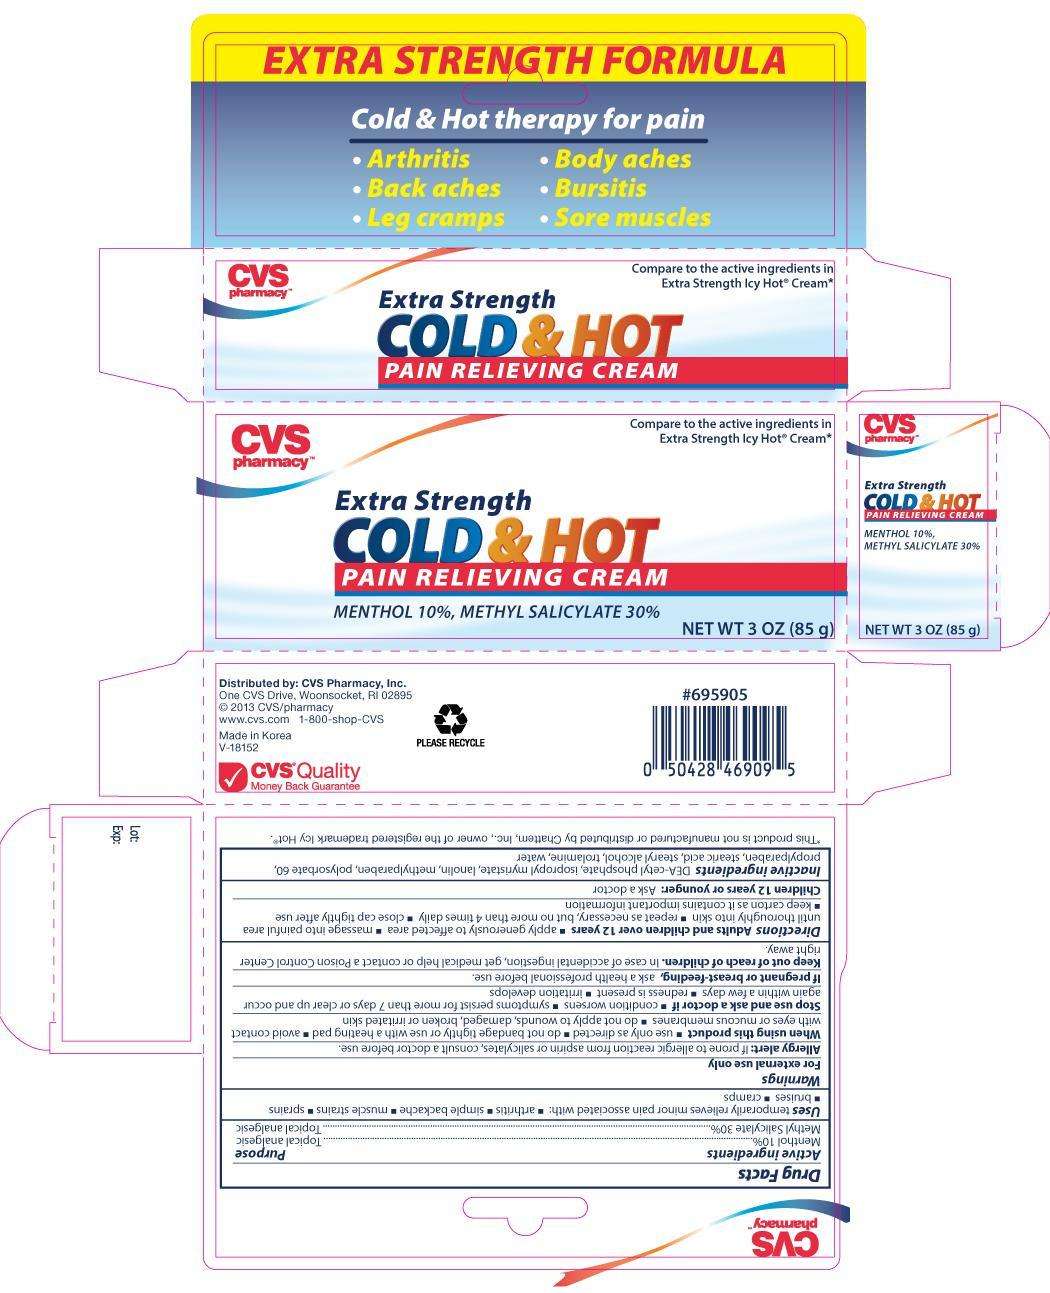 CVS Extra Strength Cold and Hot Pain Relieving